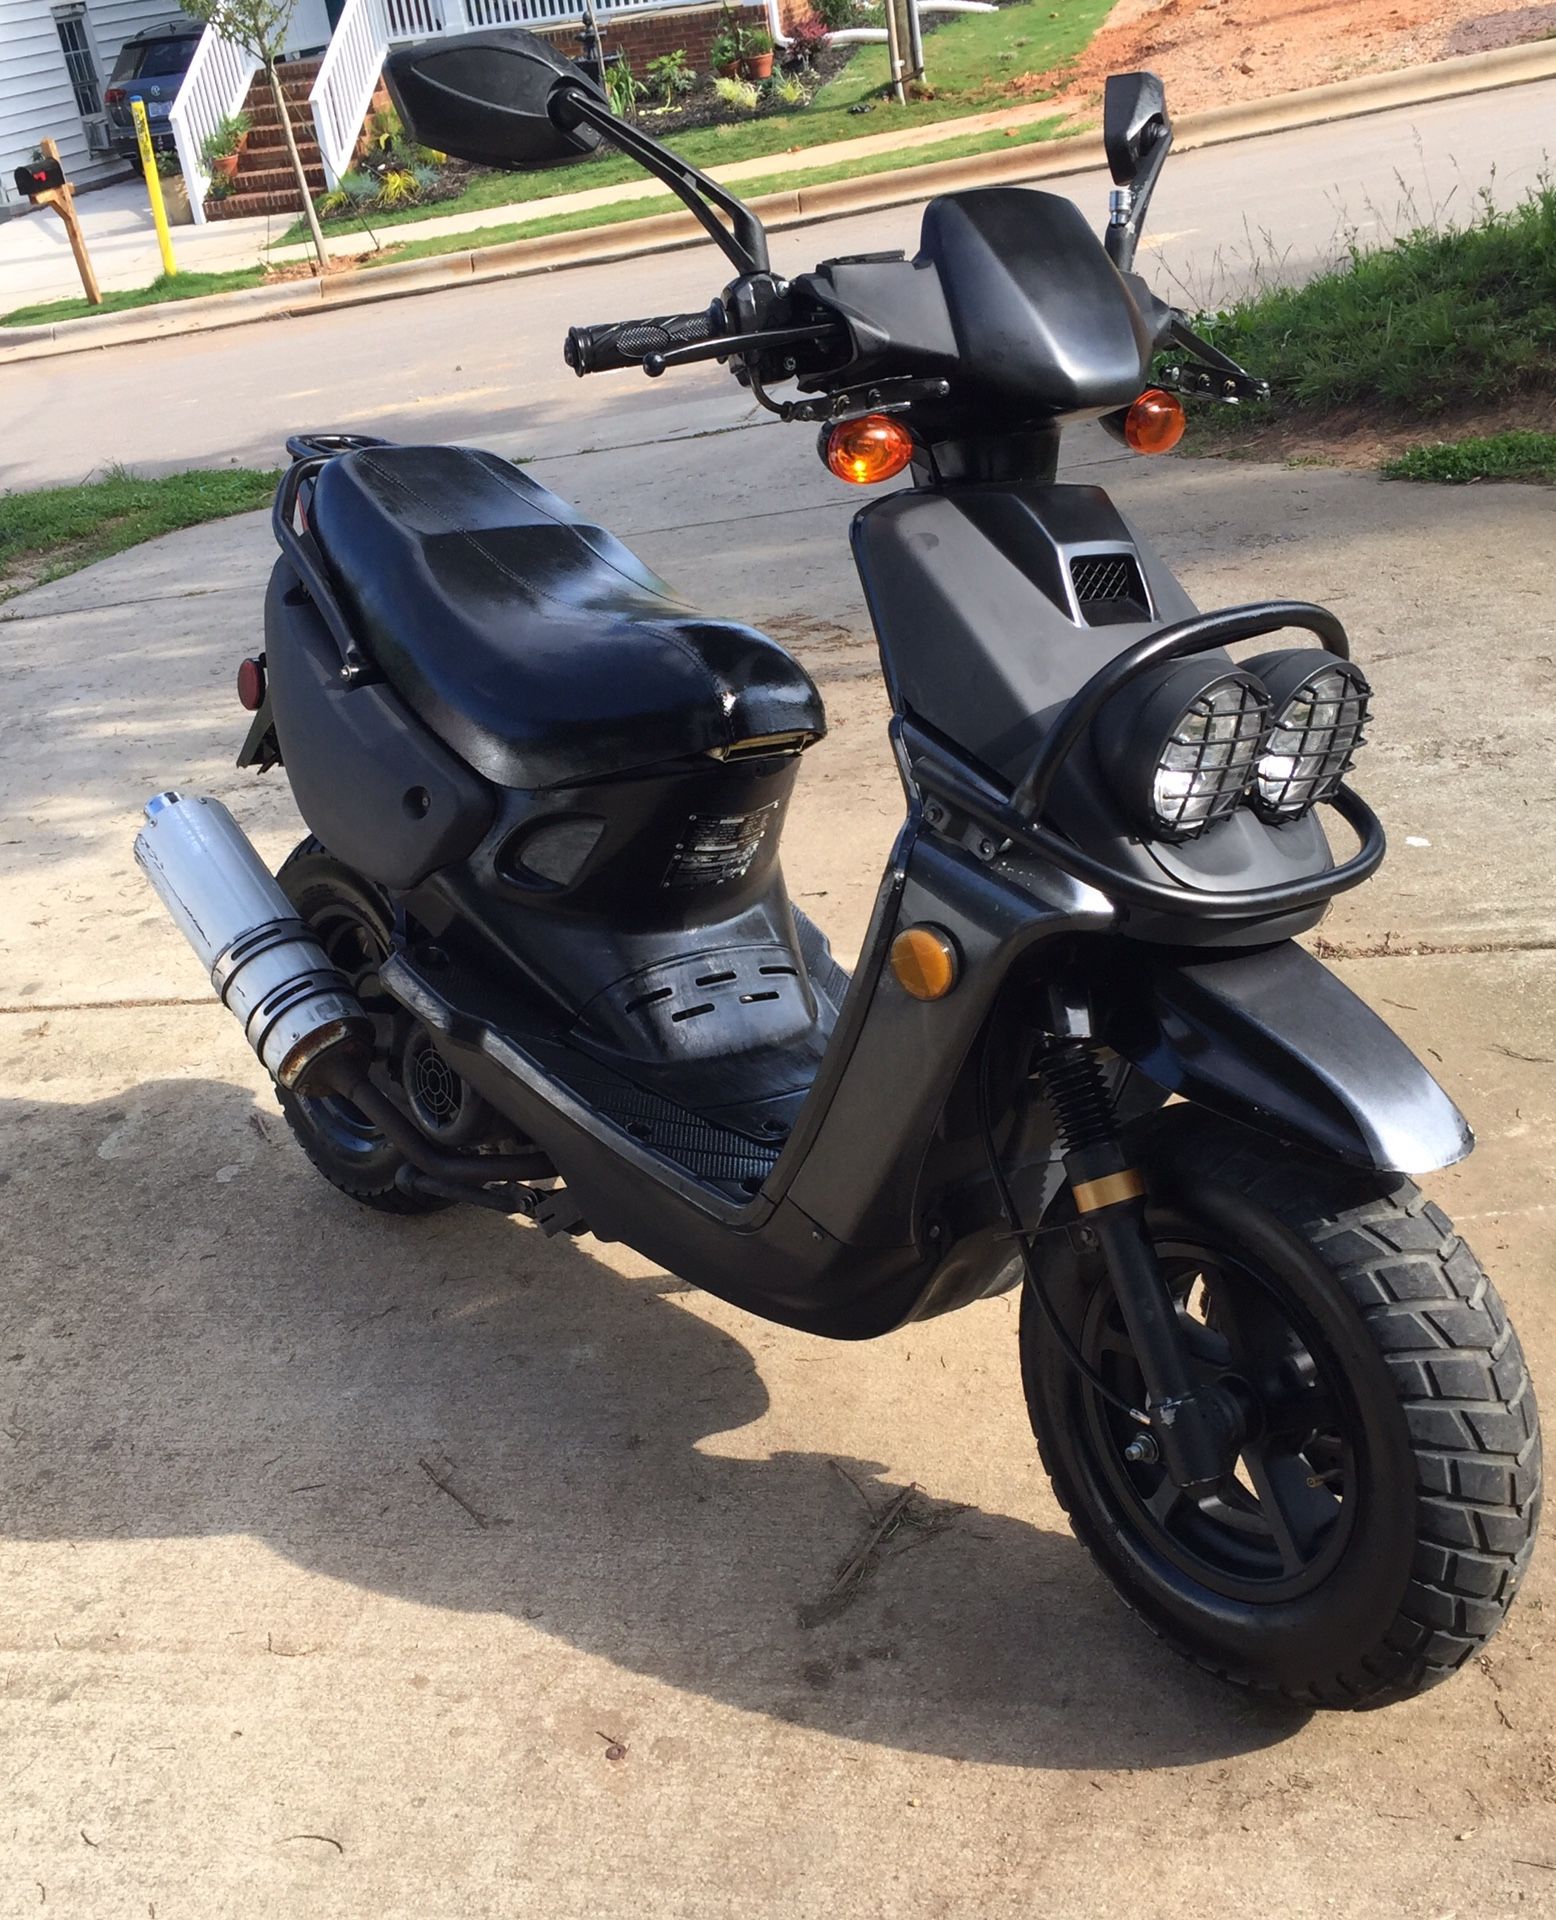 50cc upgraded to 150 scooter